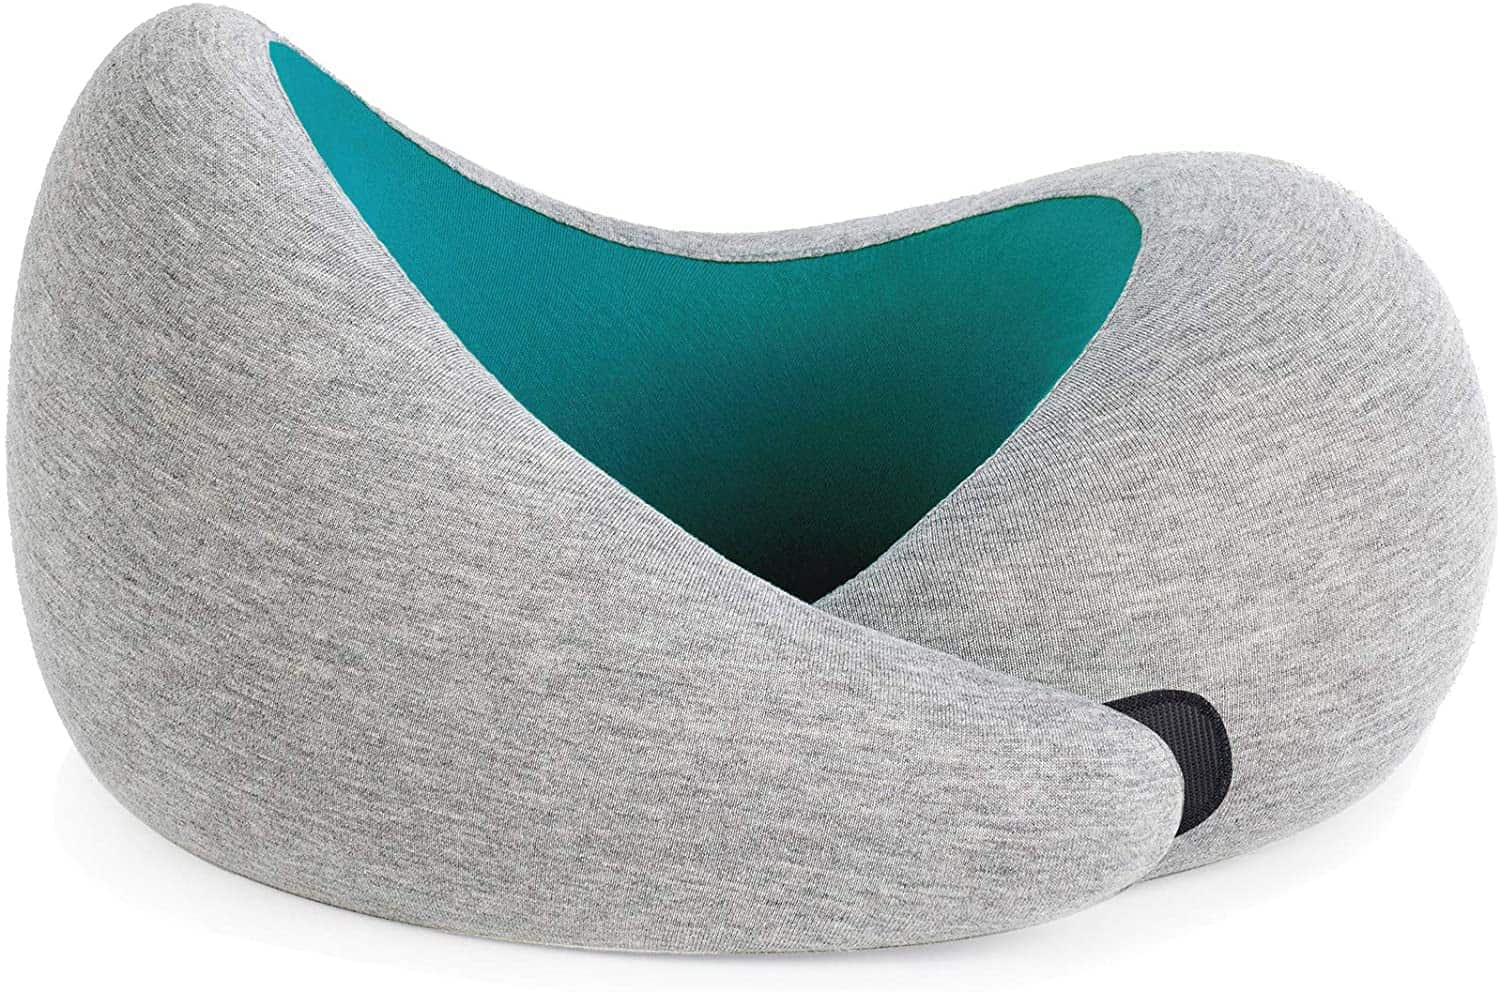 Ostrich Pillow GO Luxury Travel Pillow for Airplane Neck Support